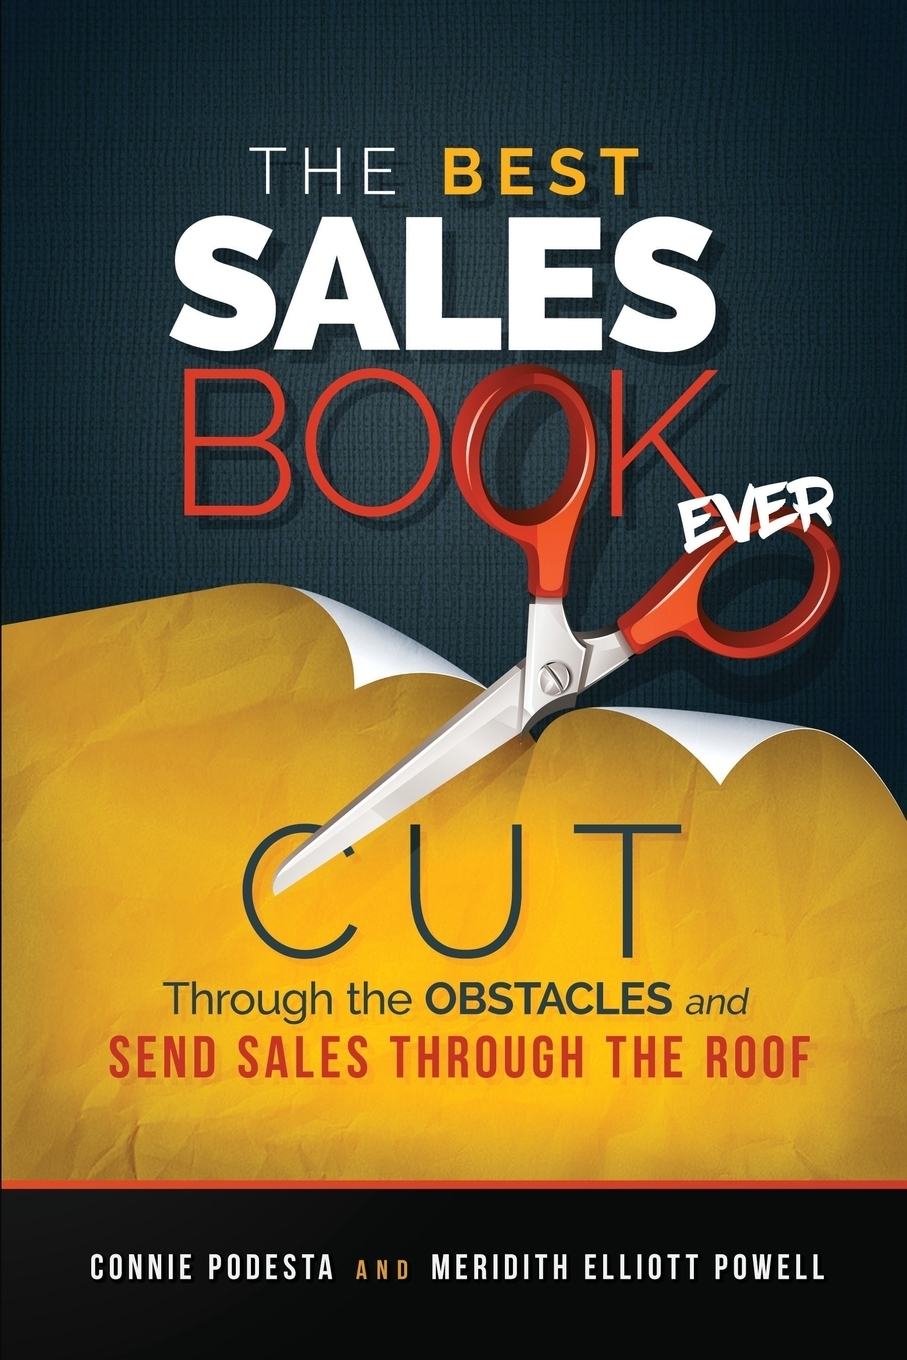 Best sales. The sales book. 50 Of a leader book. Book sales poster ideas.